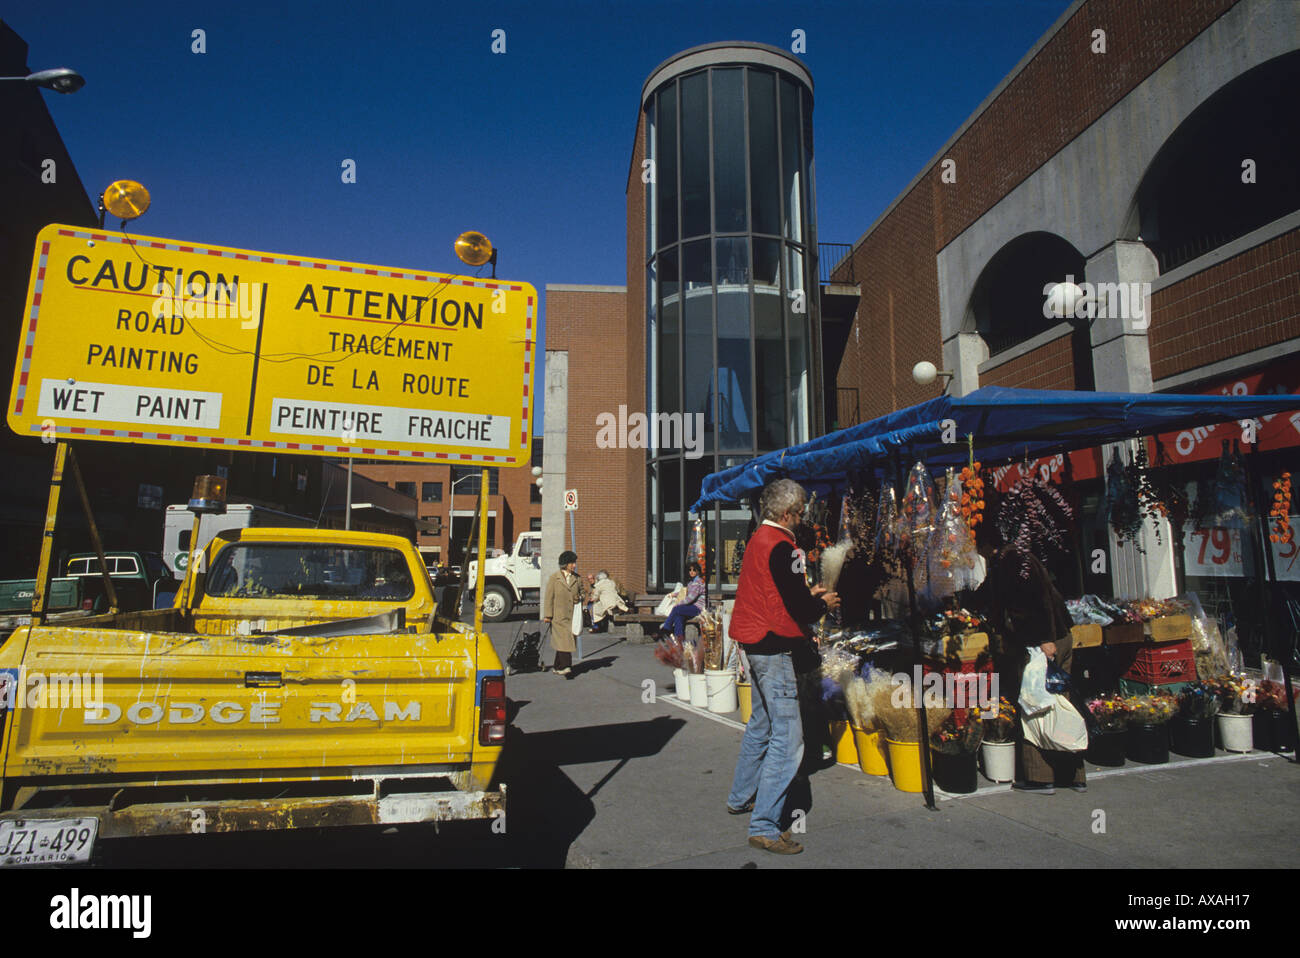 Warning sign in French and English near the Ottawa market Yellow truck with big signs CANADA Stock Photo